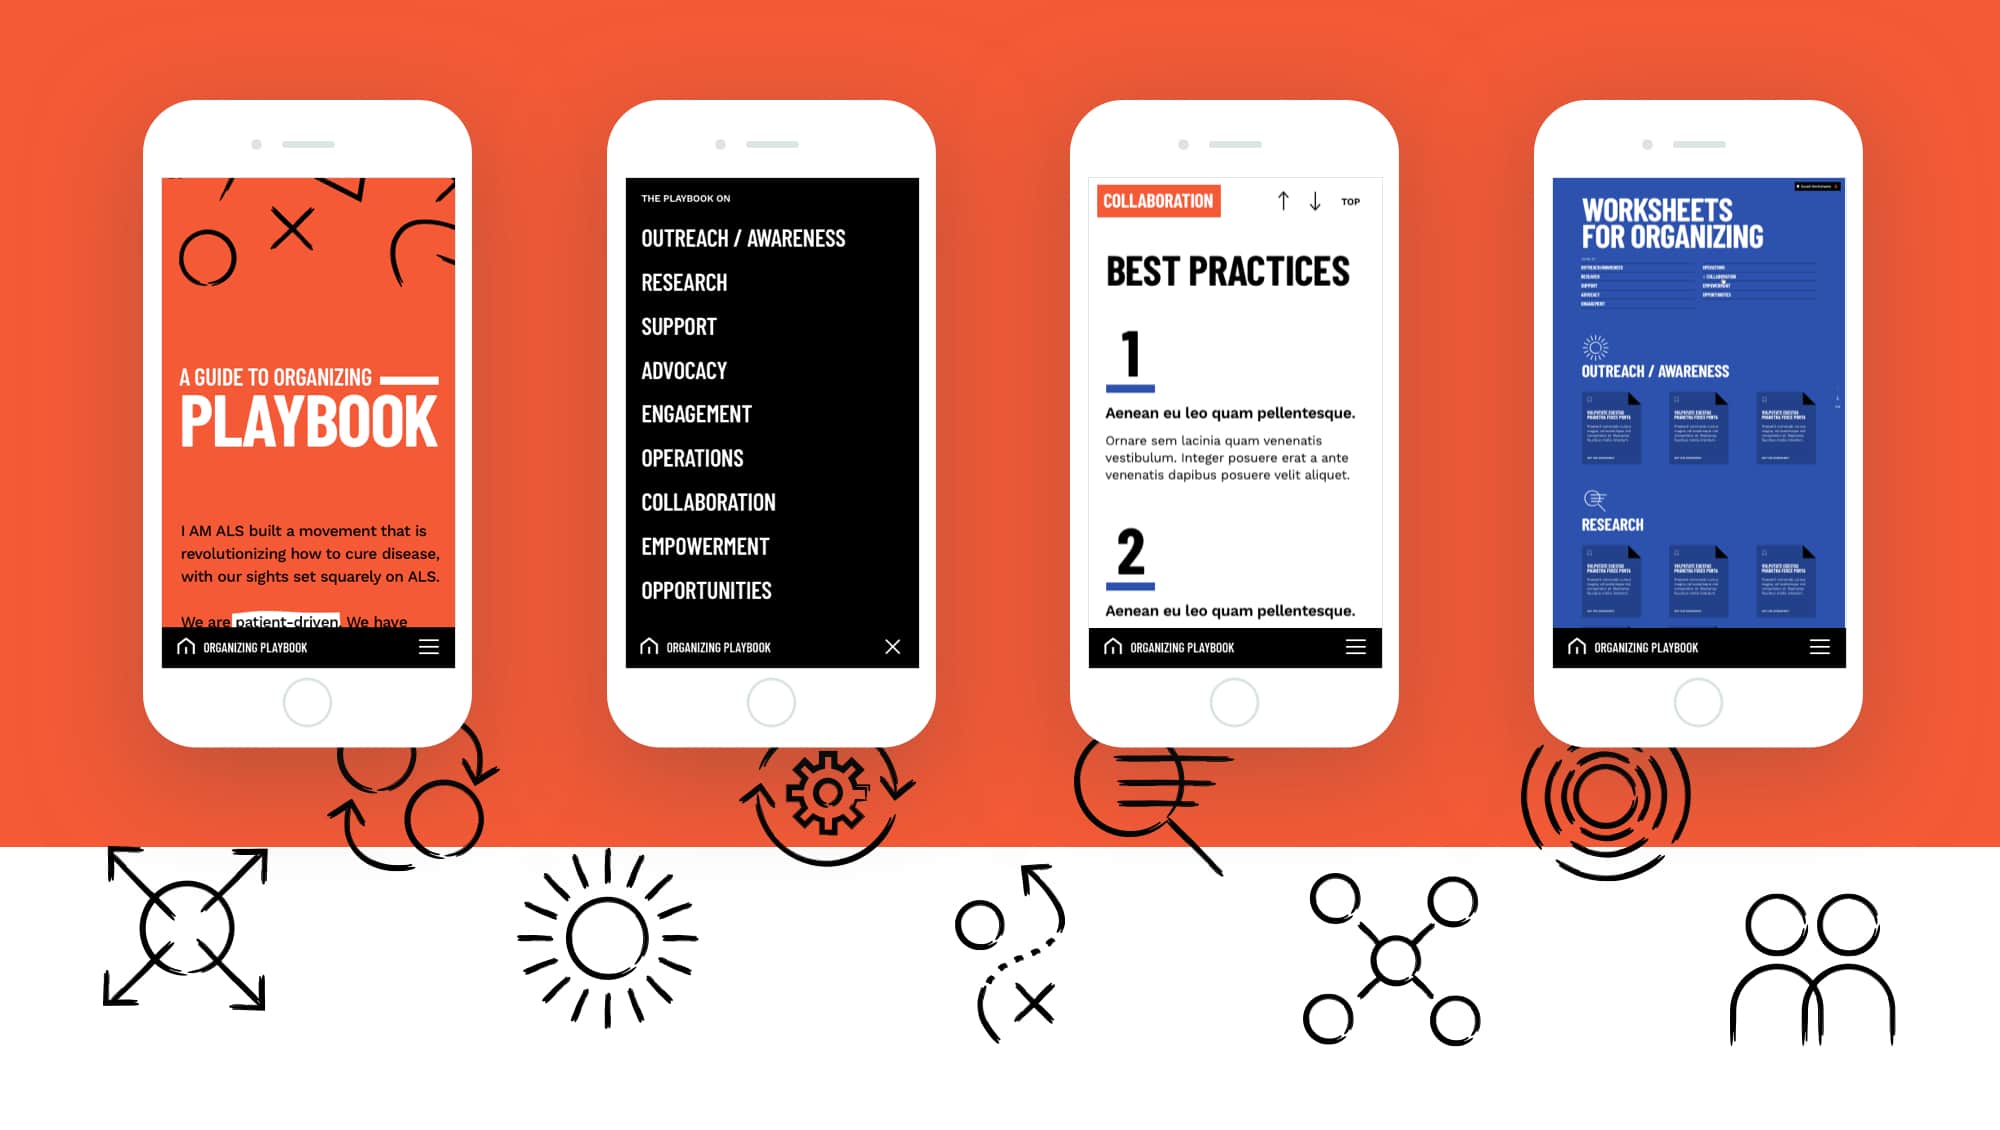 Design compositions set on a mobile device for screens from the Playbook site, arranged horizontally on an orange background. Graphic icons are arranged towards the bottom of the orange background.